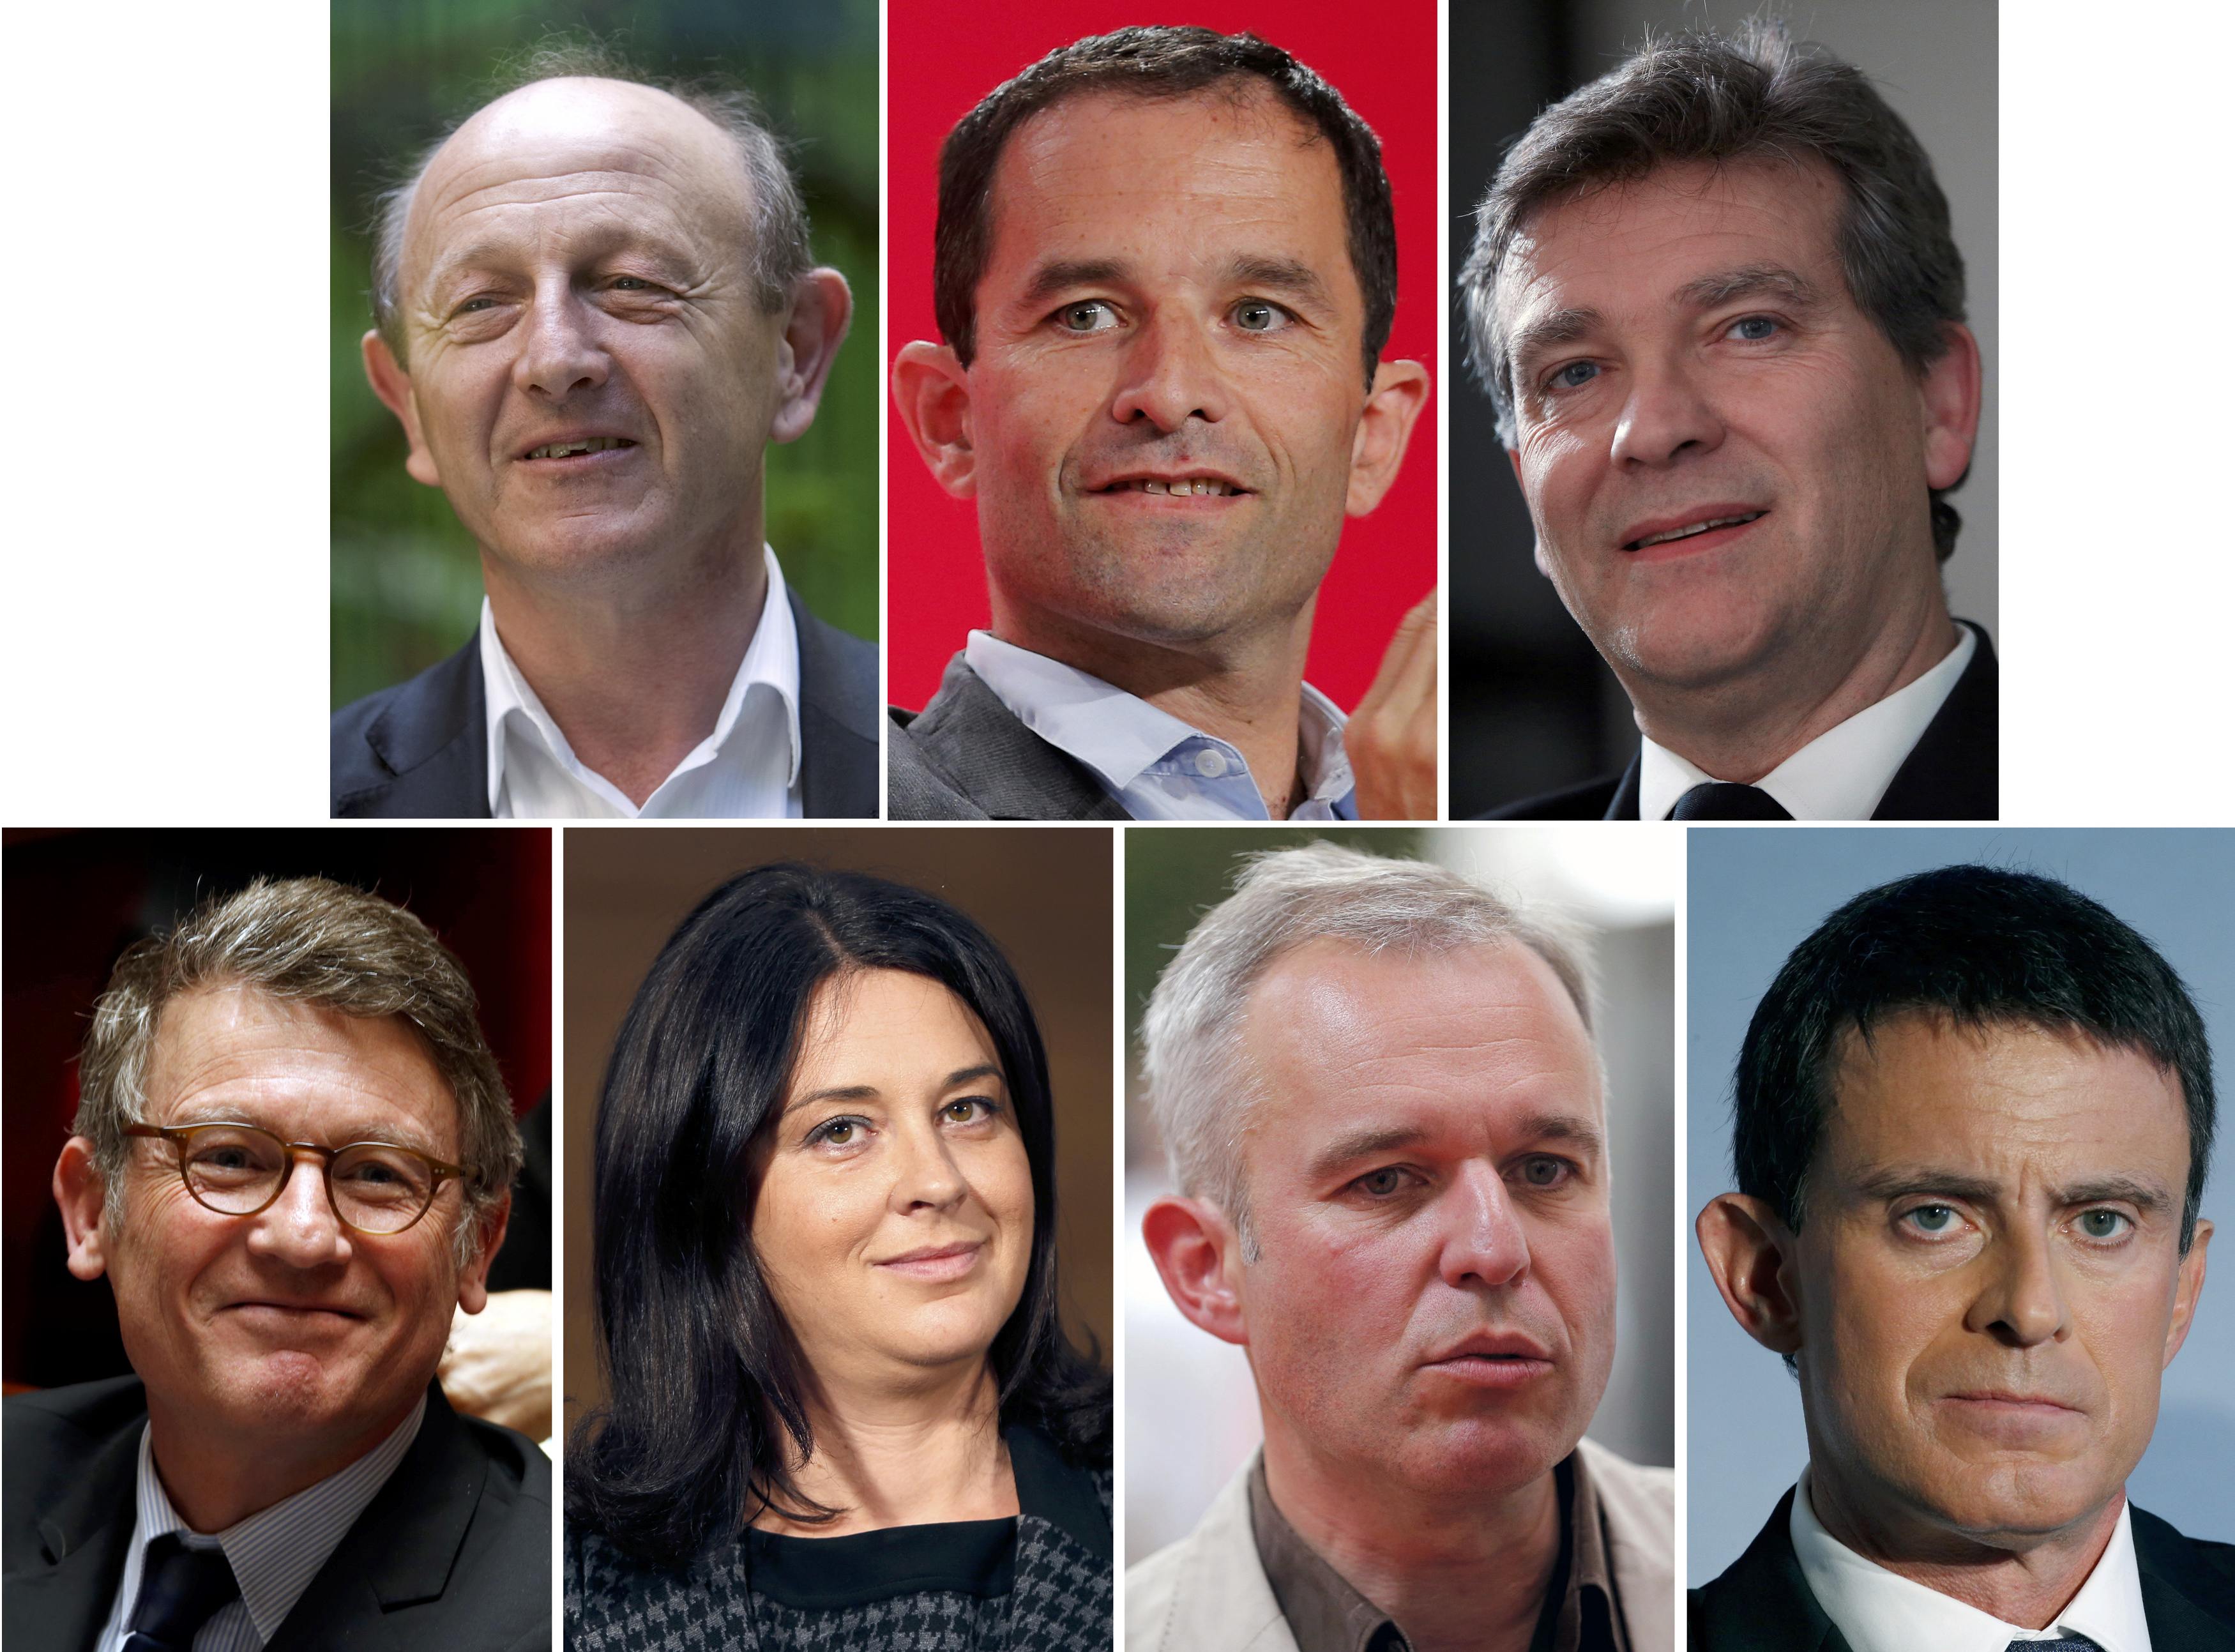 FILE PHOTO A combination picture shows portraits of French politicians, top row, L-R, Jean-Luc Bennahmias, Beonît Hamon , Arnaud Montebourg, bottom row, L-R, Vincent Peillon, Sylvia Pinel, Francois De Rugy, and Manuel Valls, all candidates on the eve of a first round vote for the French left's presidential primary, January 21, 2017 in Paris,France,. REUTERS/Staff/File Photo